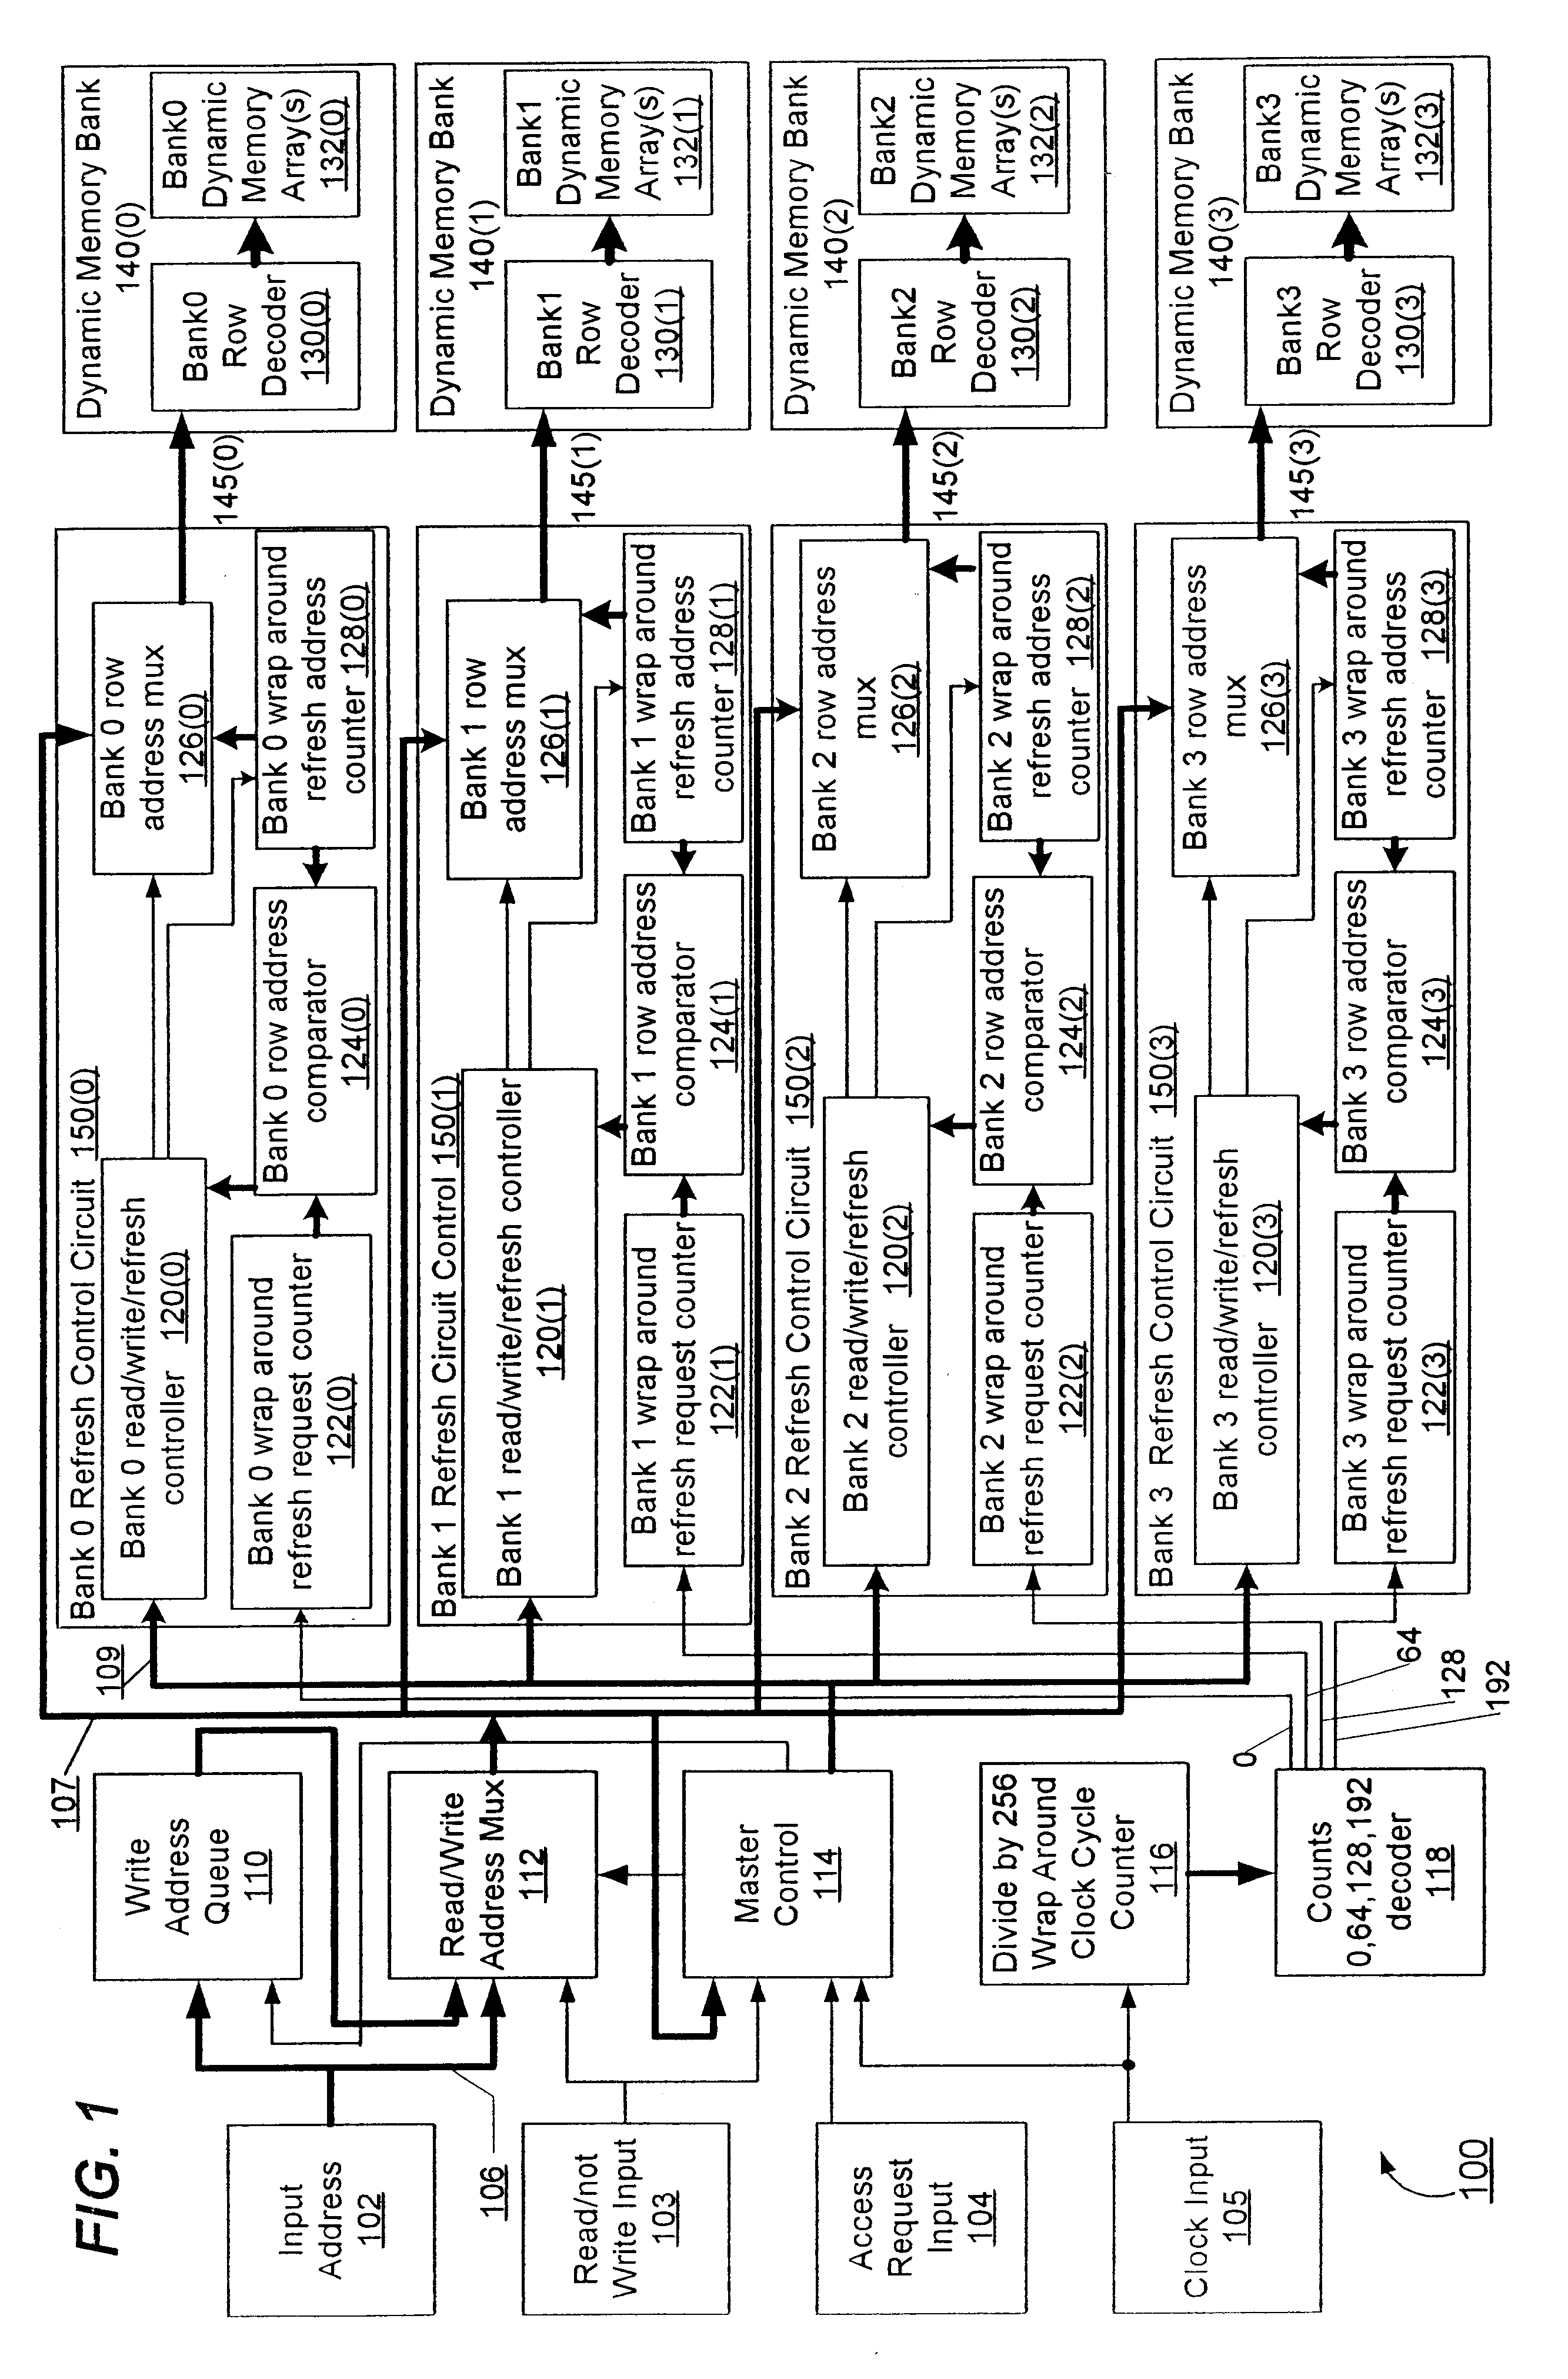 Integrated circuit random access memory capable of automatic internal refresh of memory array